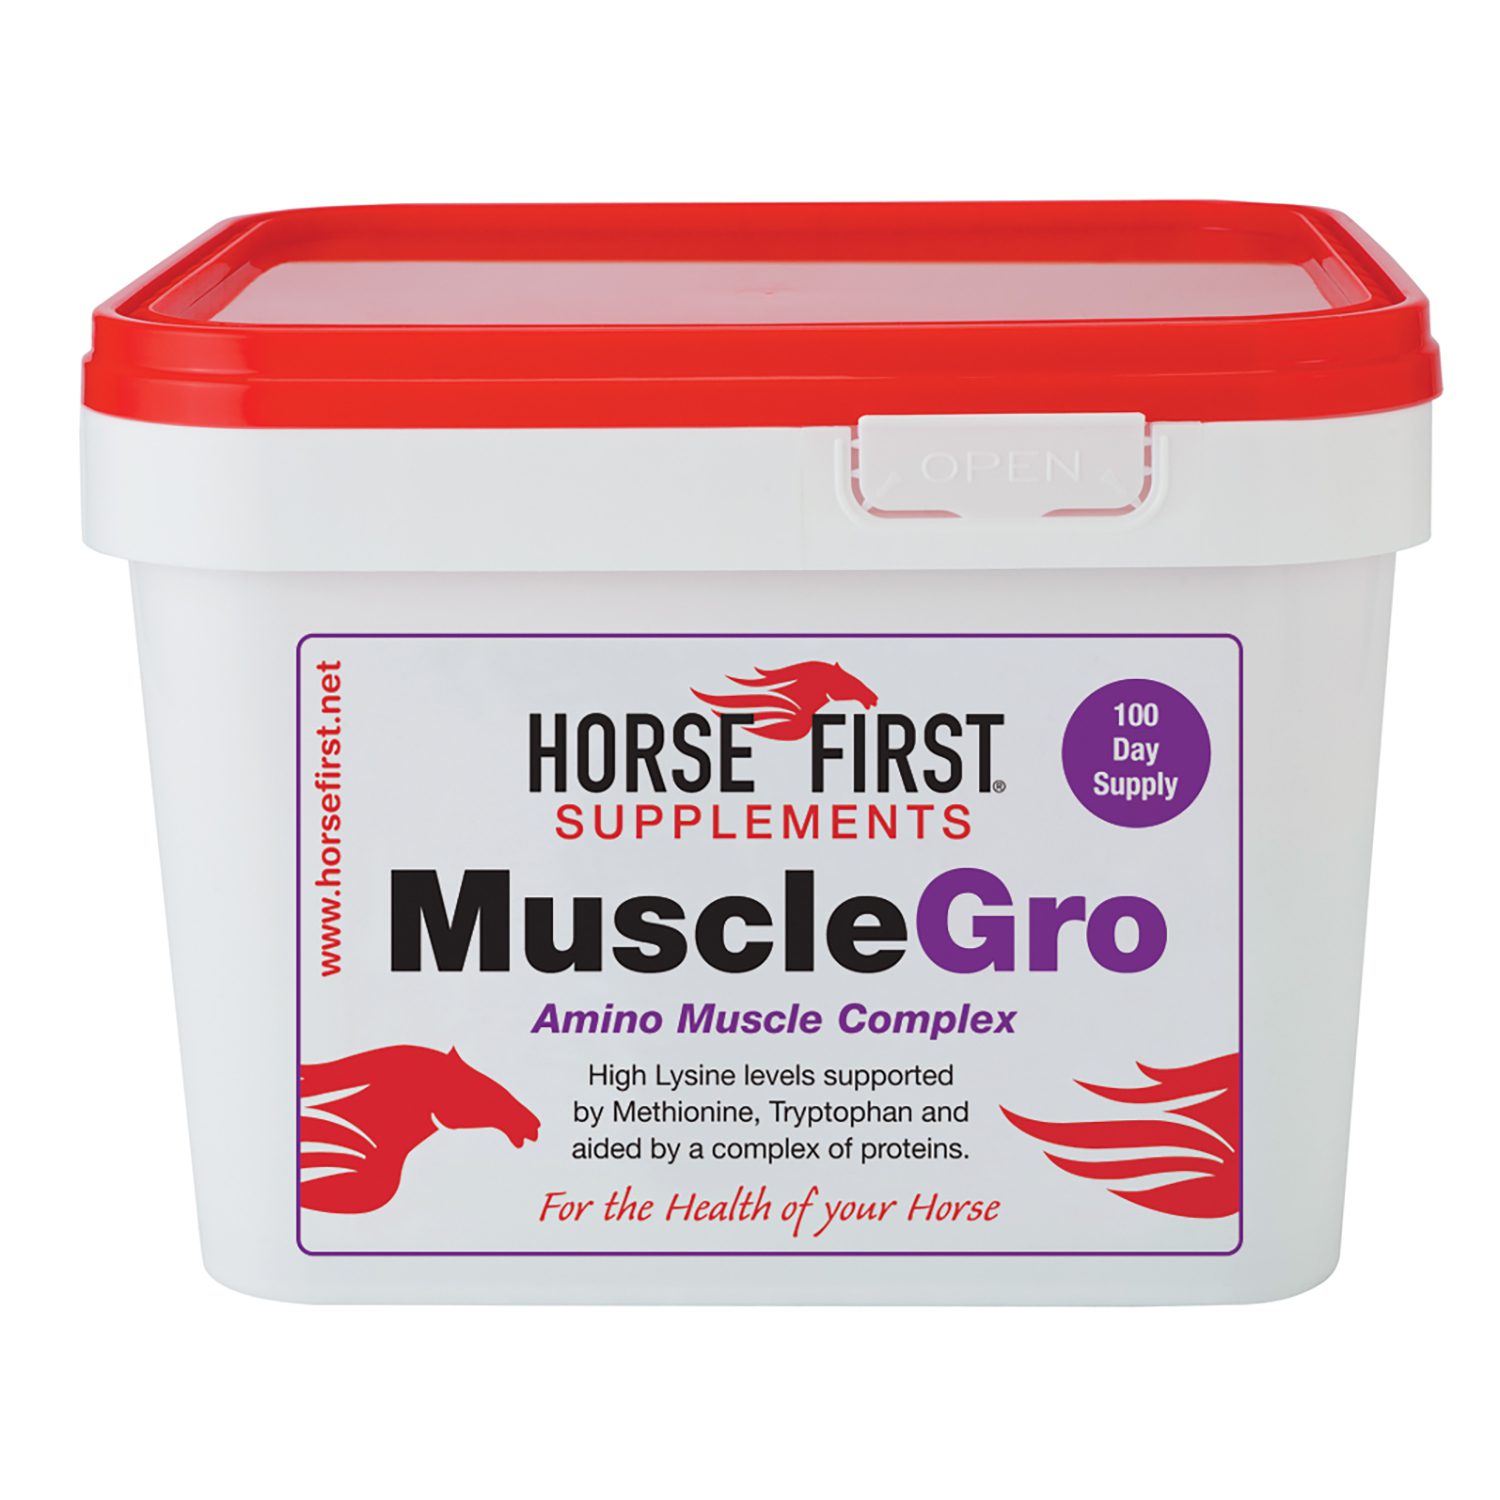 Horse Supplements Click & Collect